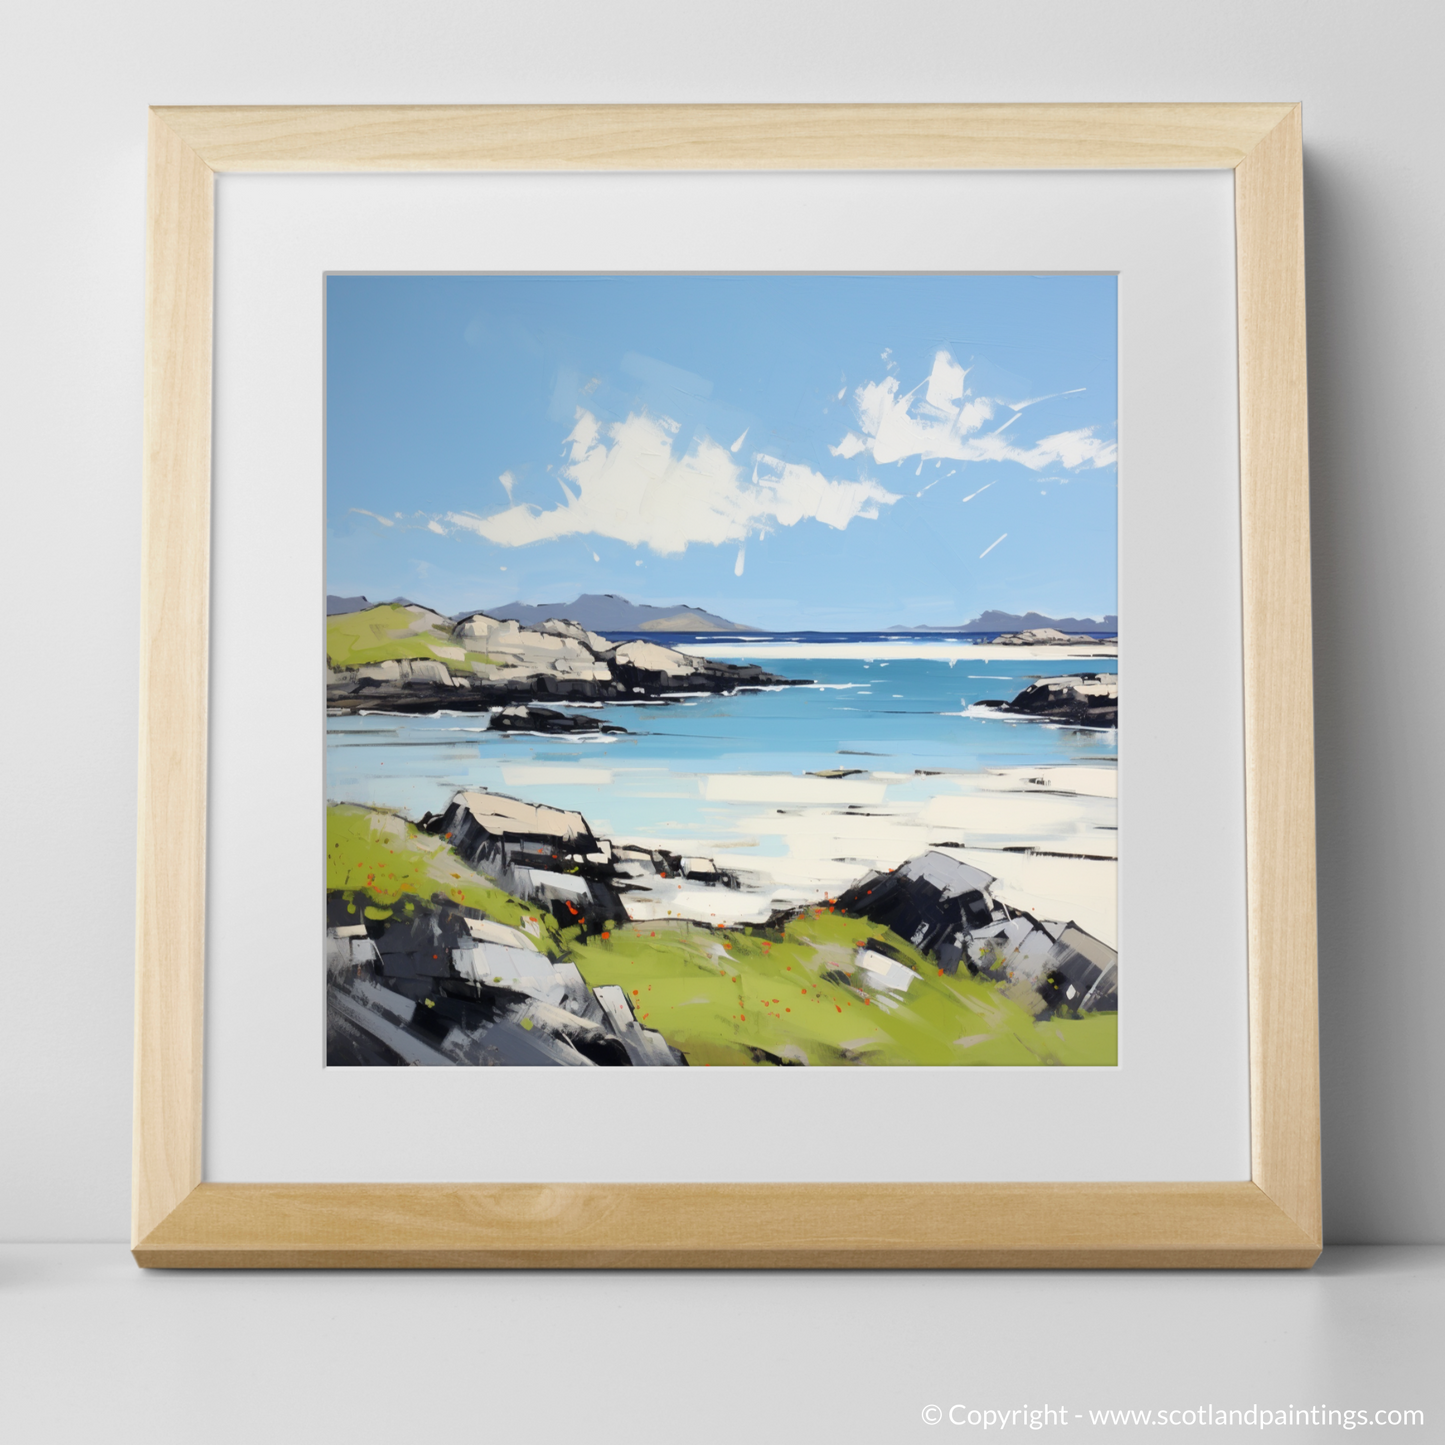 Art Print of Isle of Harris, Outer Hebrides in summer with a natural frame